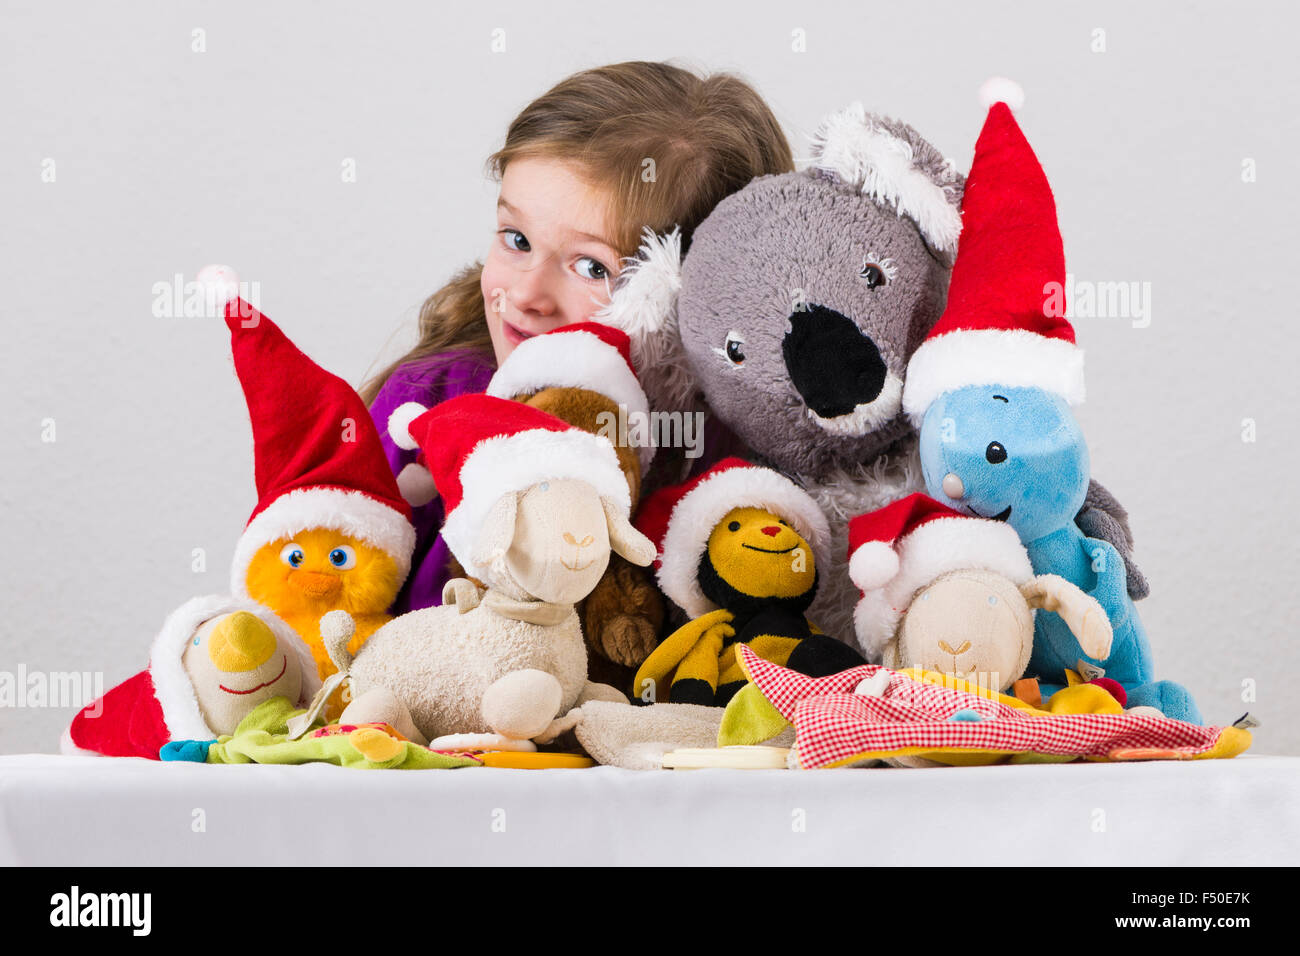 A three year old girl is presenting her favoured colorful cuddly toys, wearing Santa Claus hats, on a white table Stock Photo